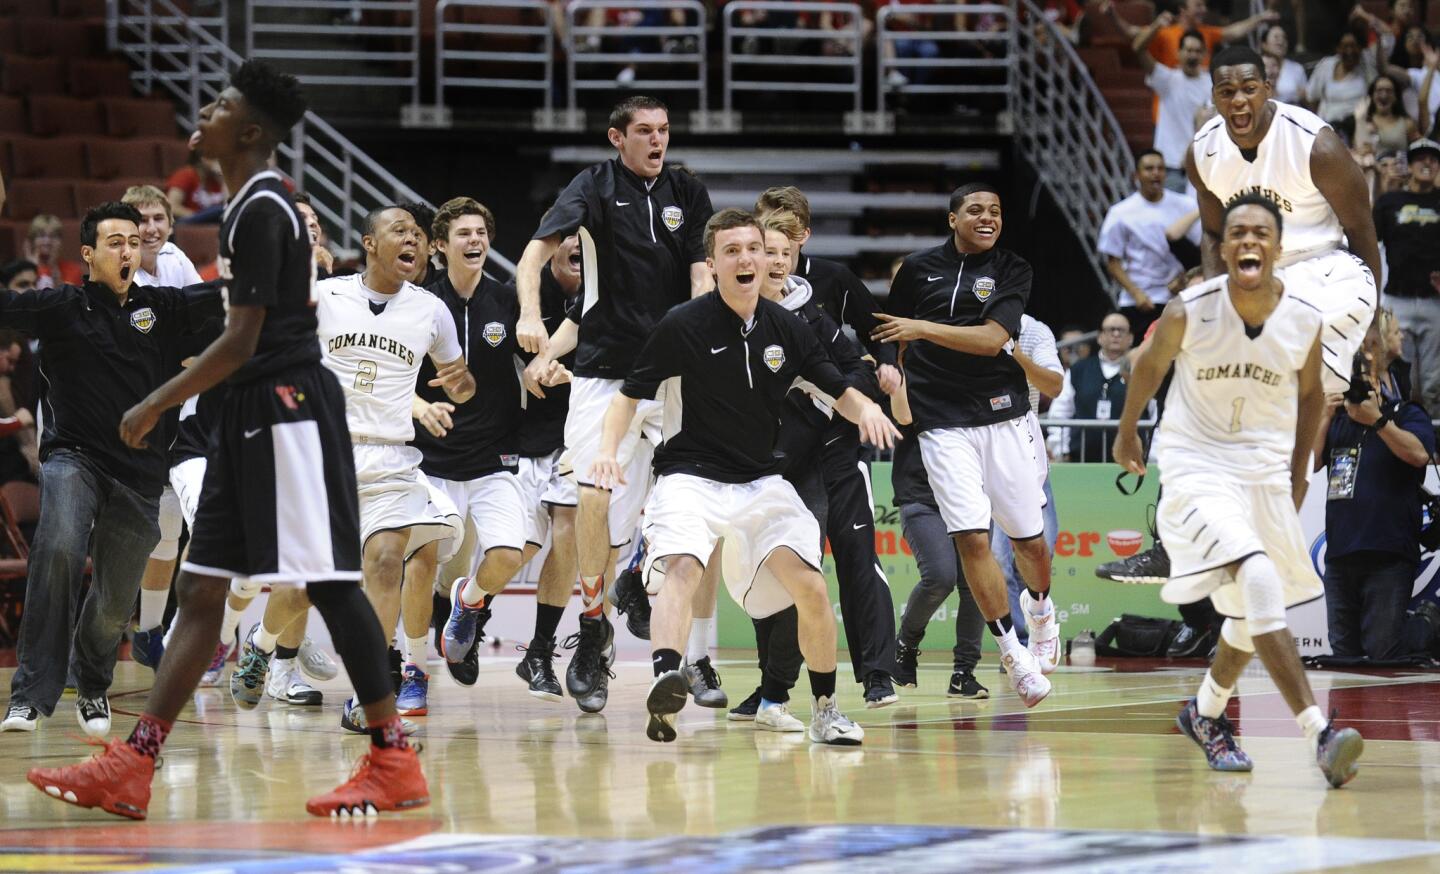 Canyon players celebrate at the end of the game as Lawndale's Deandre Snedecor,left, walks off the court after the Southern Section Division 2AA championship game Saturday at the Honda Center Saturday. The Comanches came back from a 28-point defecit to win in double overtime.